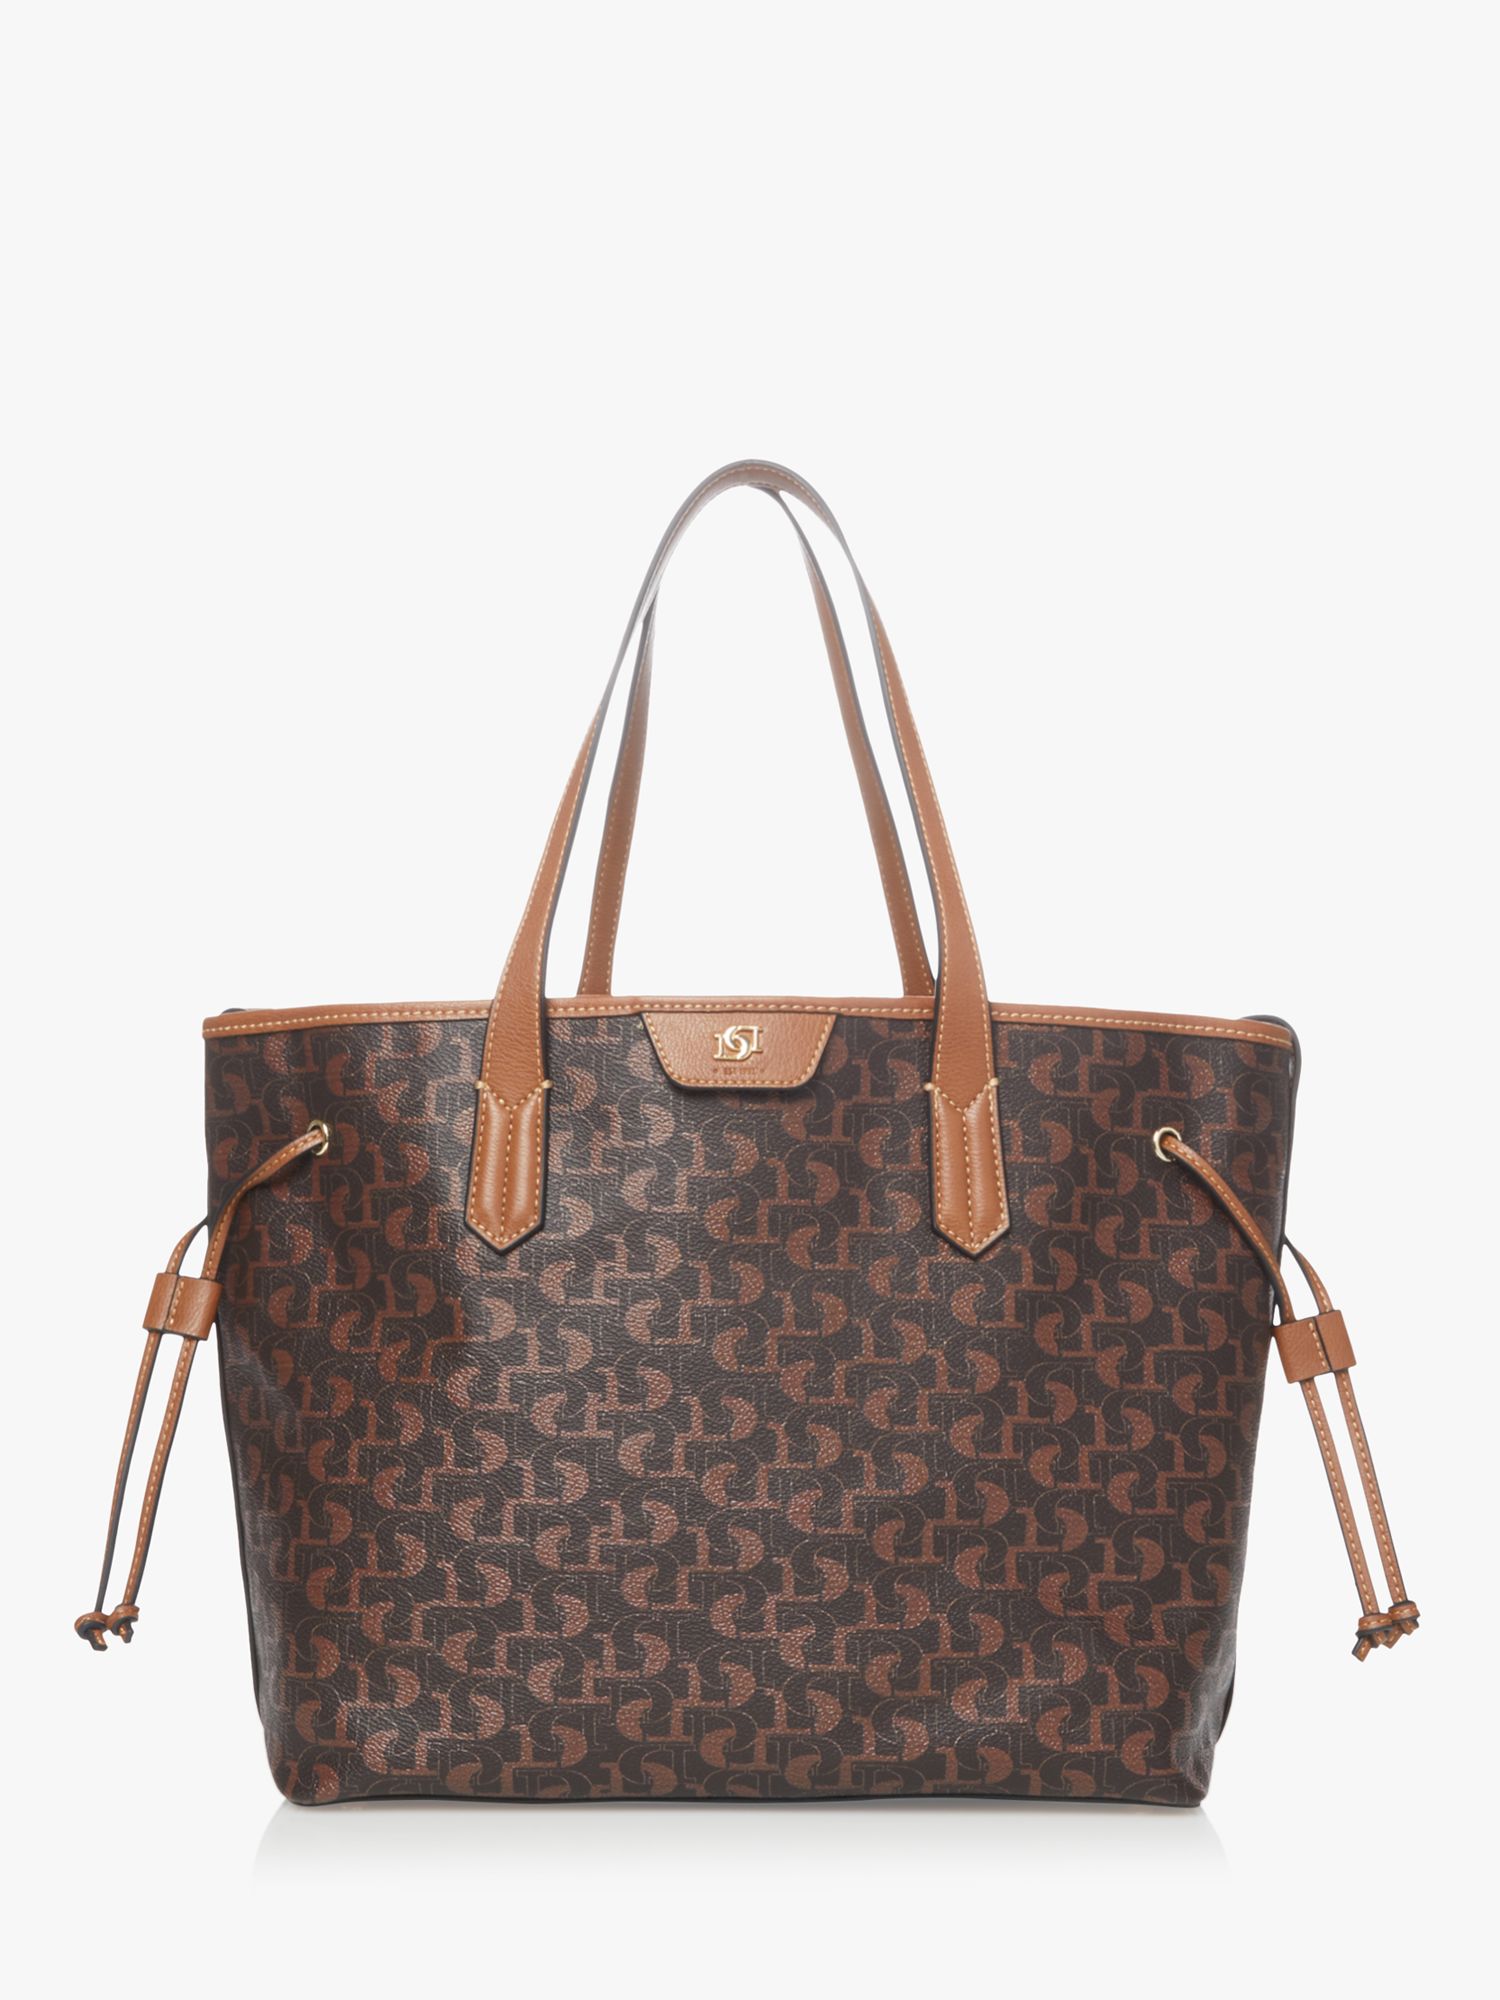 7 LUXE Louis Vuitton Neverfull Dupes: Get The Iconic Look